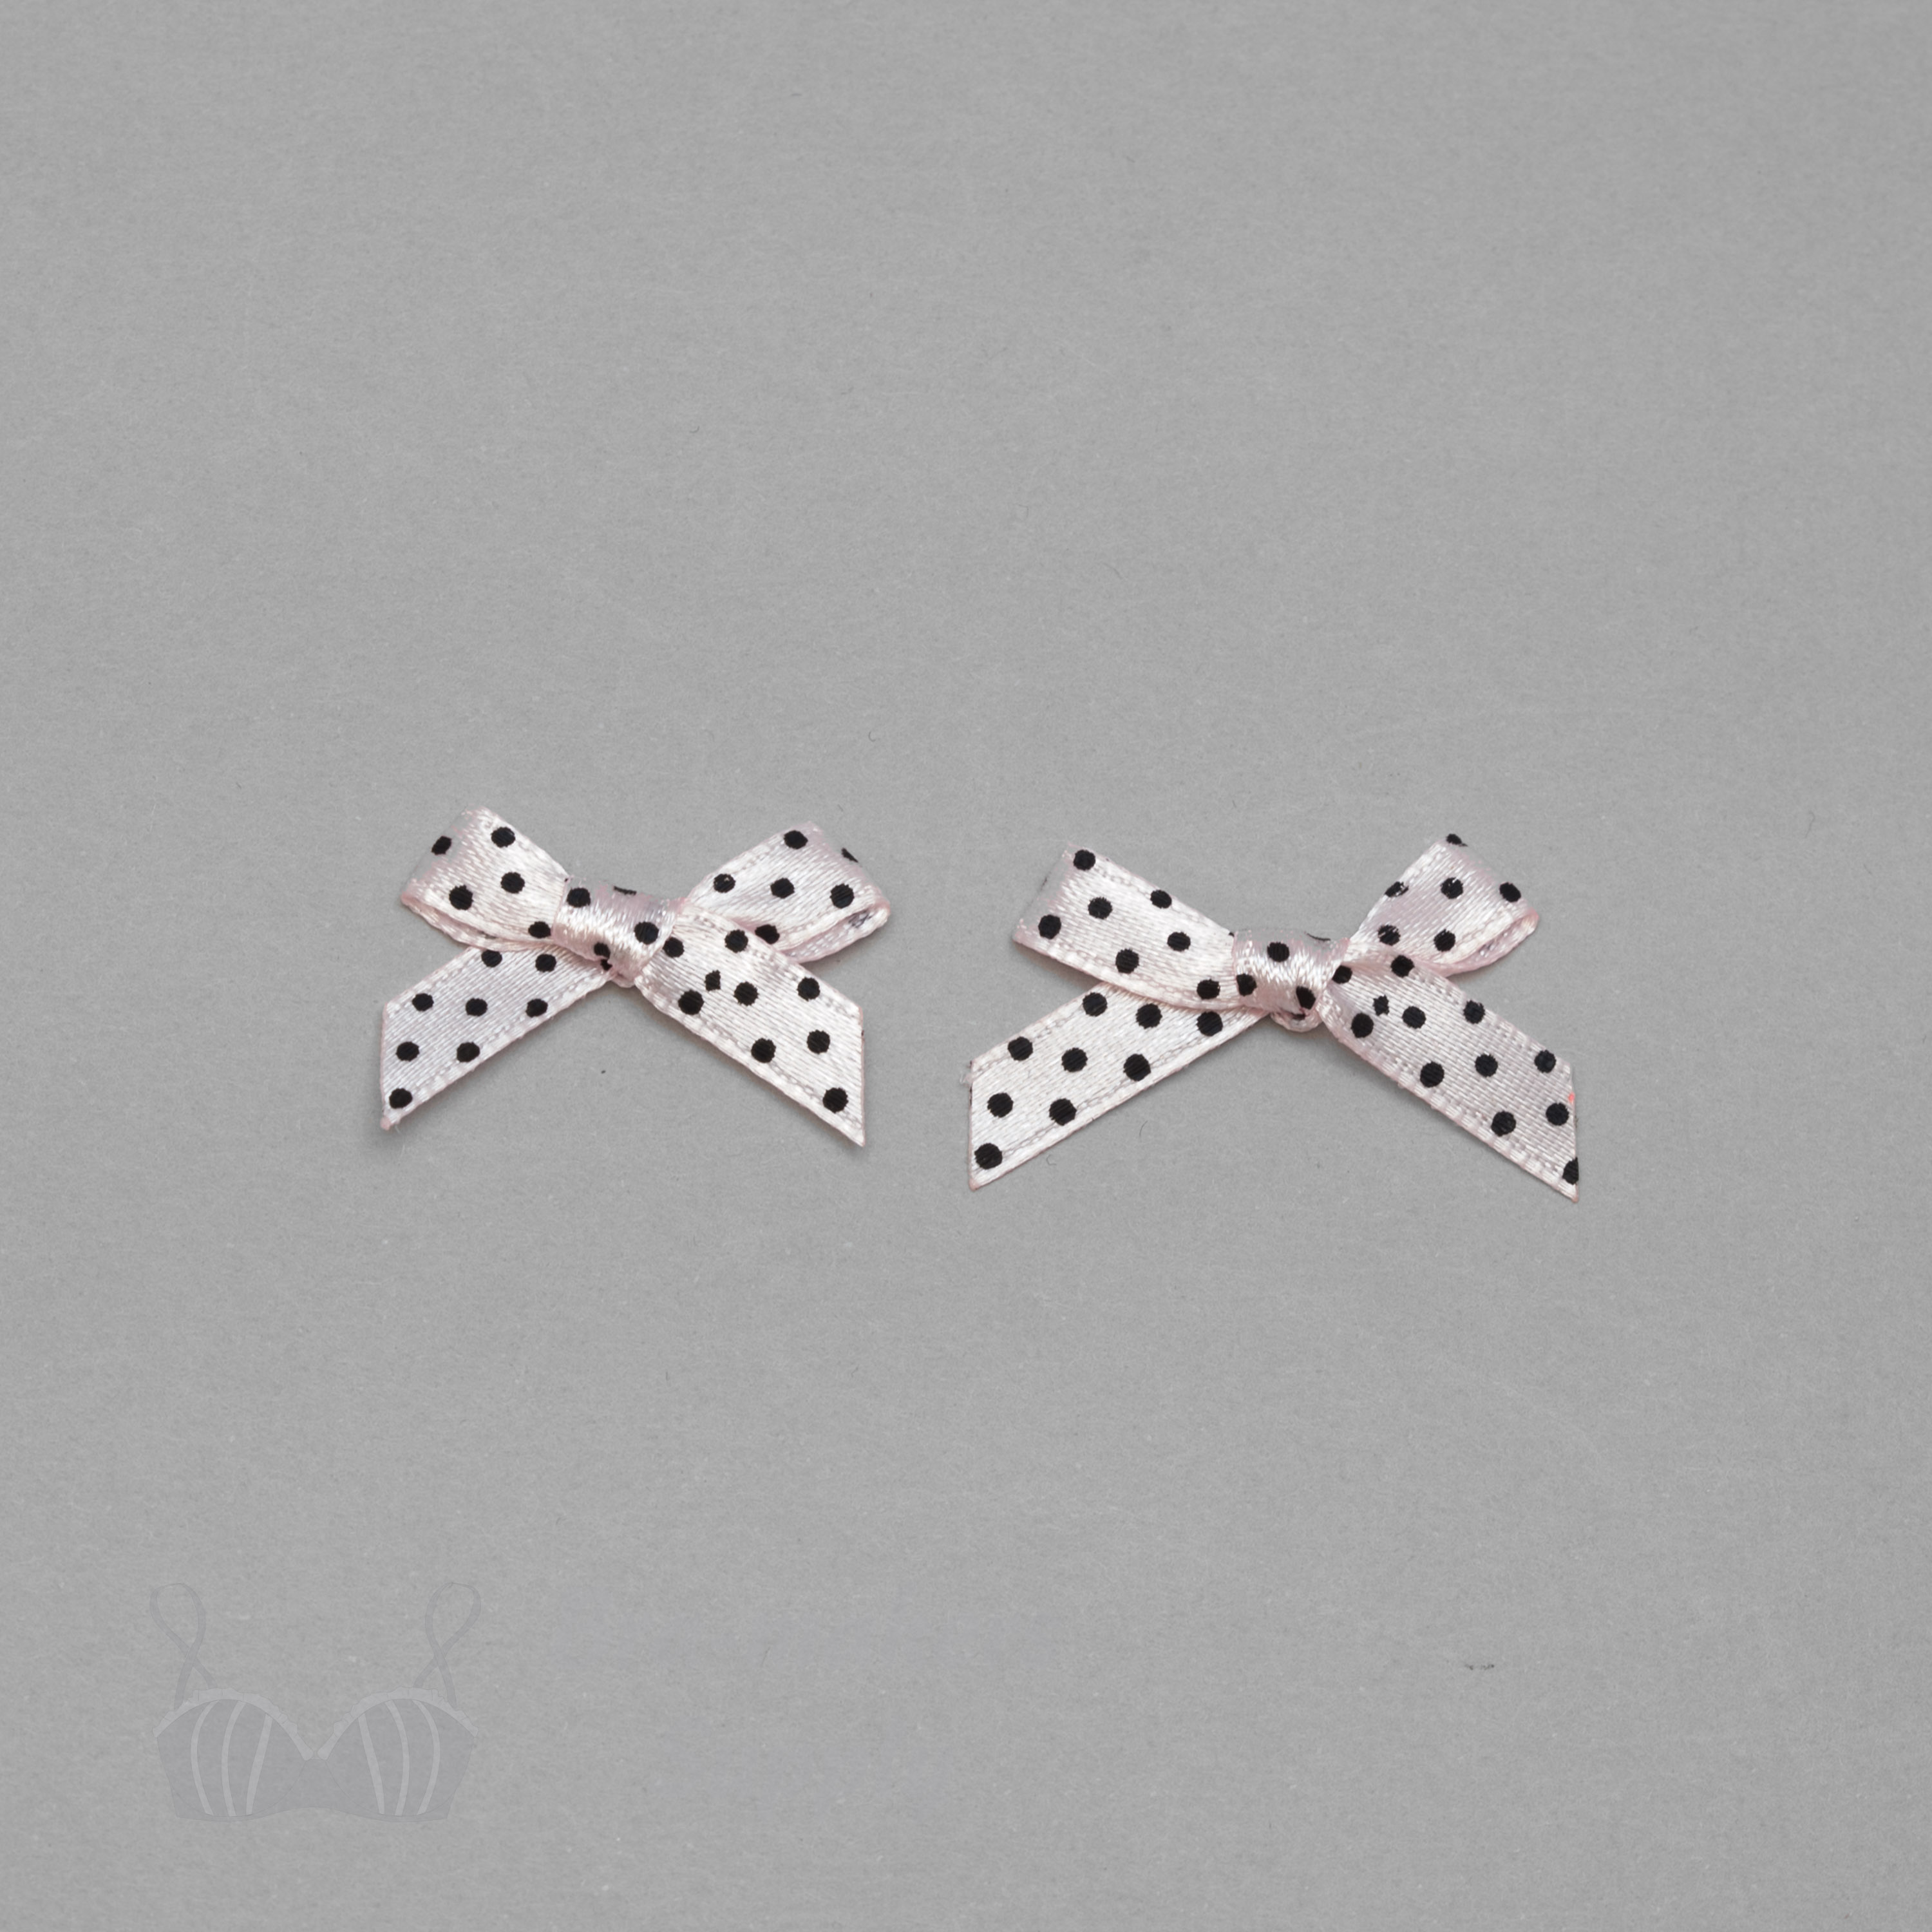 decorative polka-dot bra bows AB-21.40 black dots on pink from Bra-Makers Supply set of 2 shown